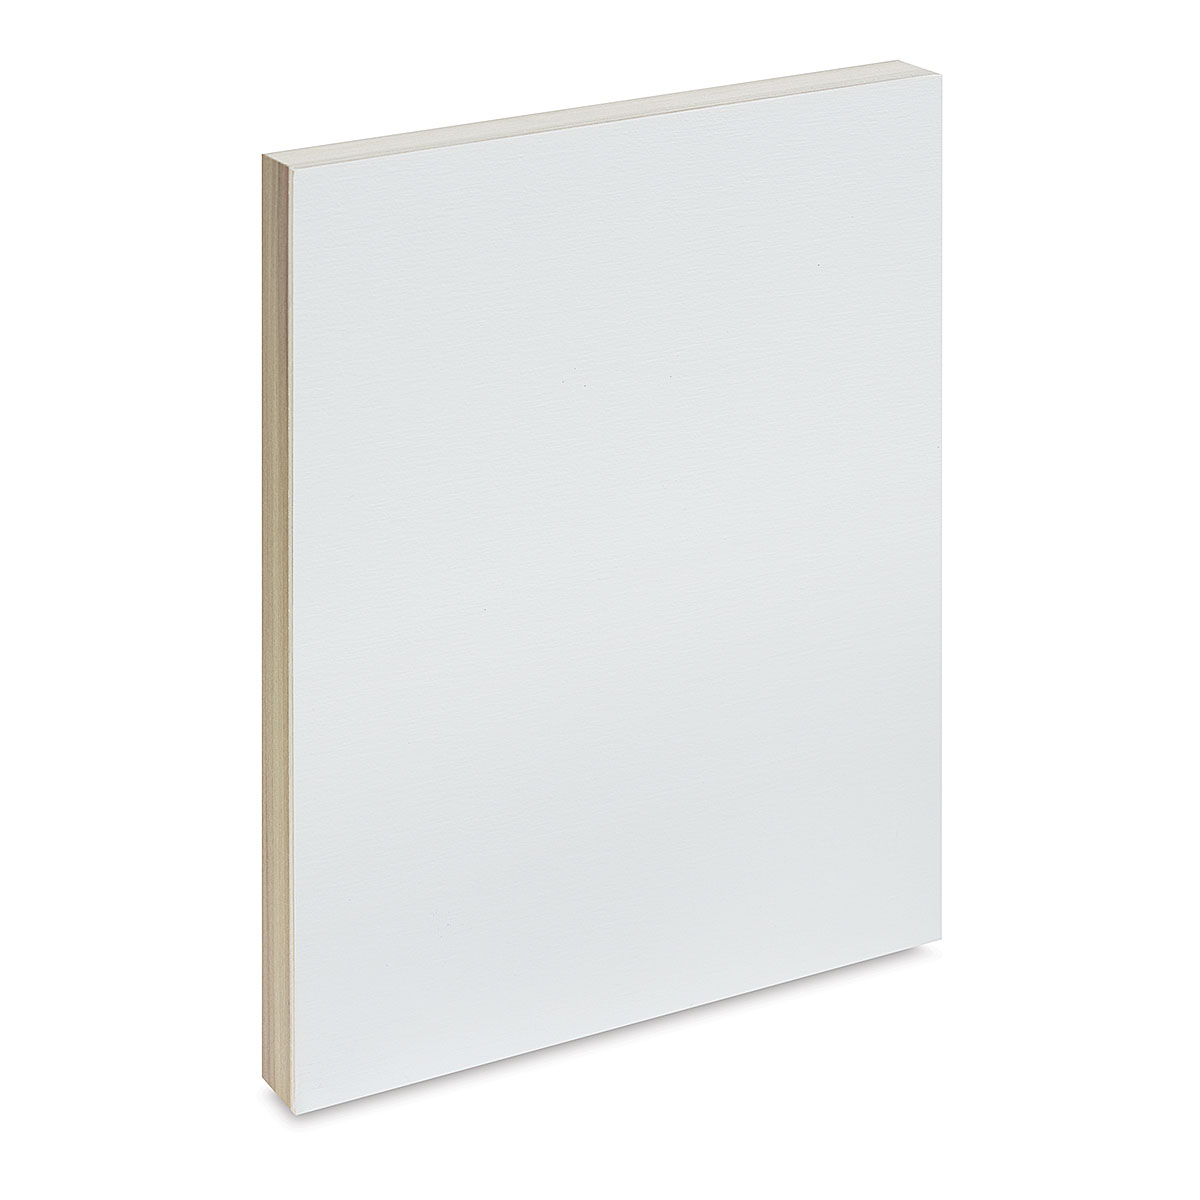 American Easel AEG1824 18 x 24 in. Flat Gesso Painting Panel - White